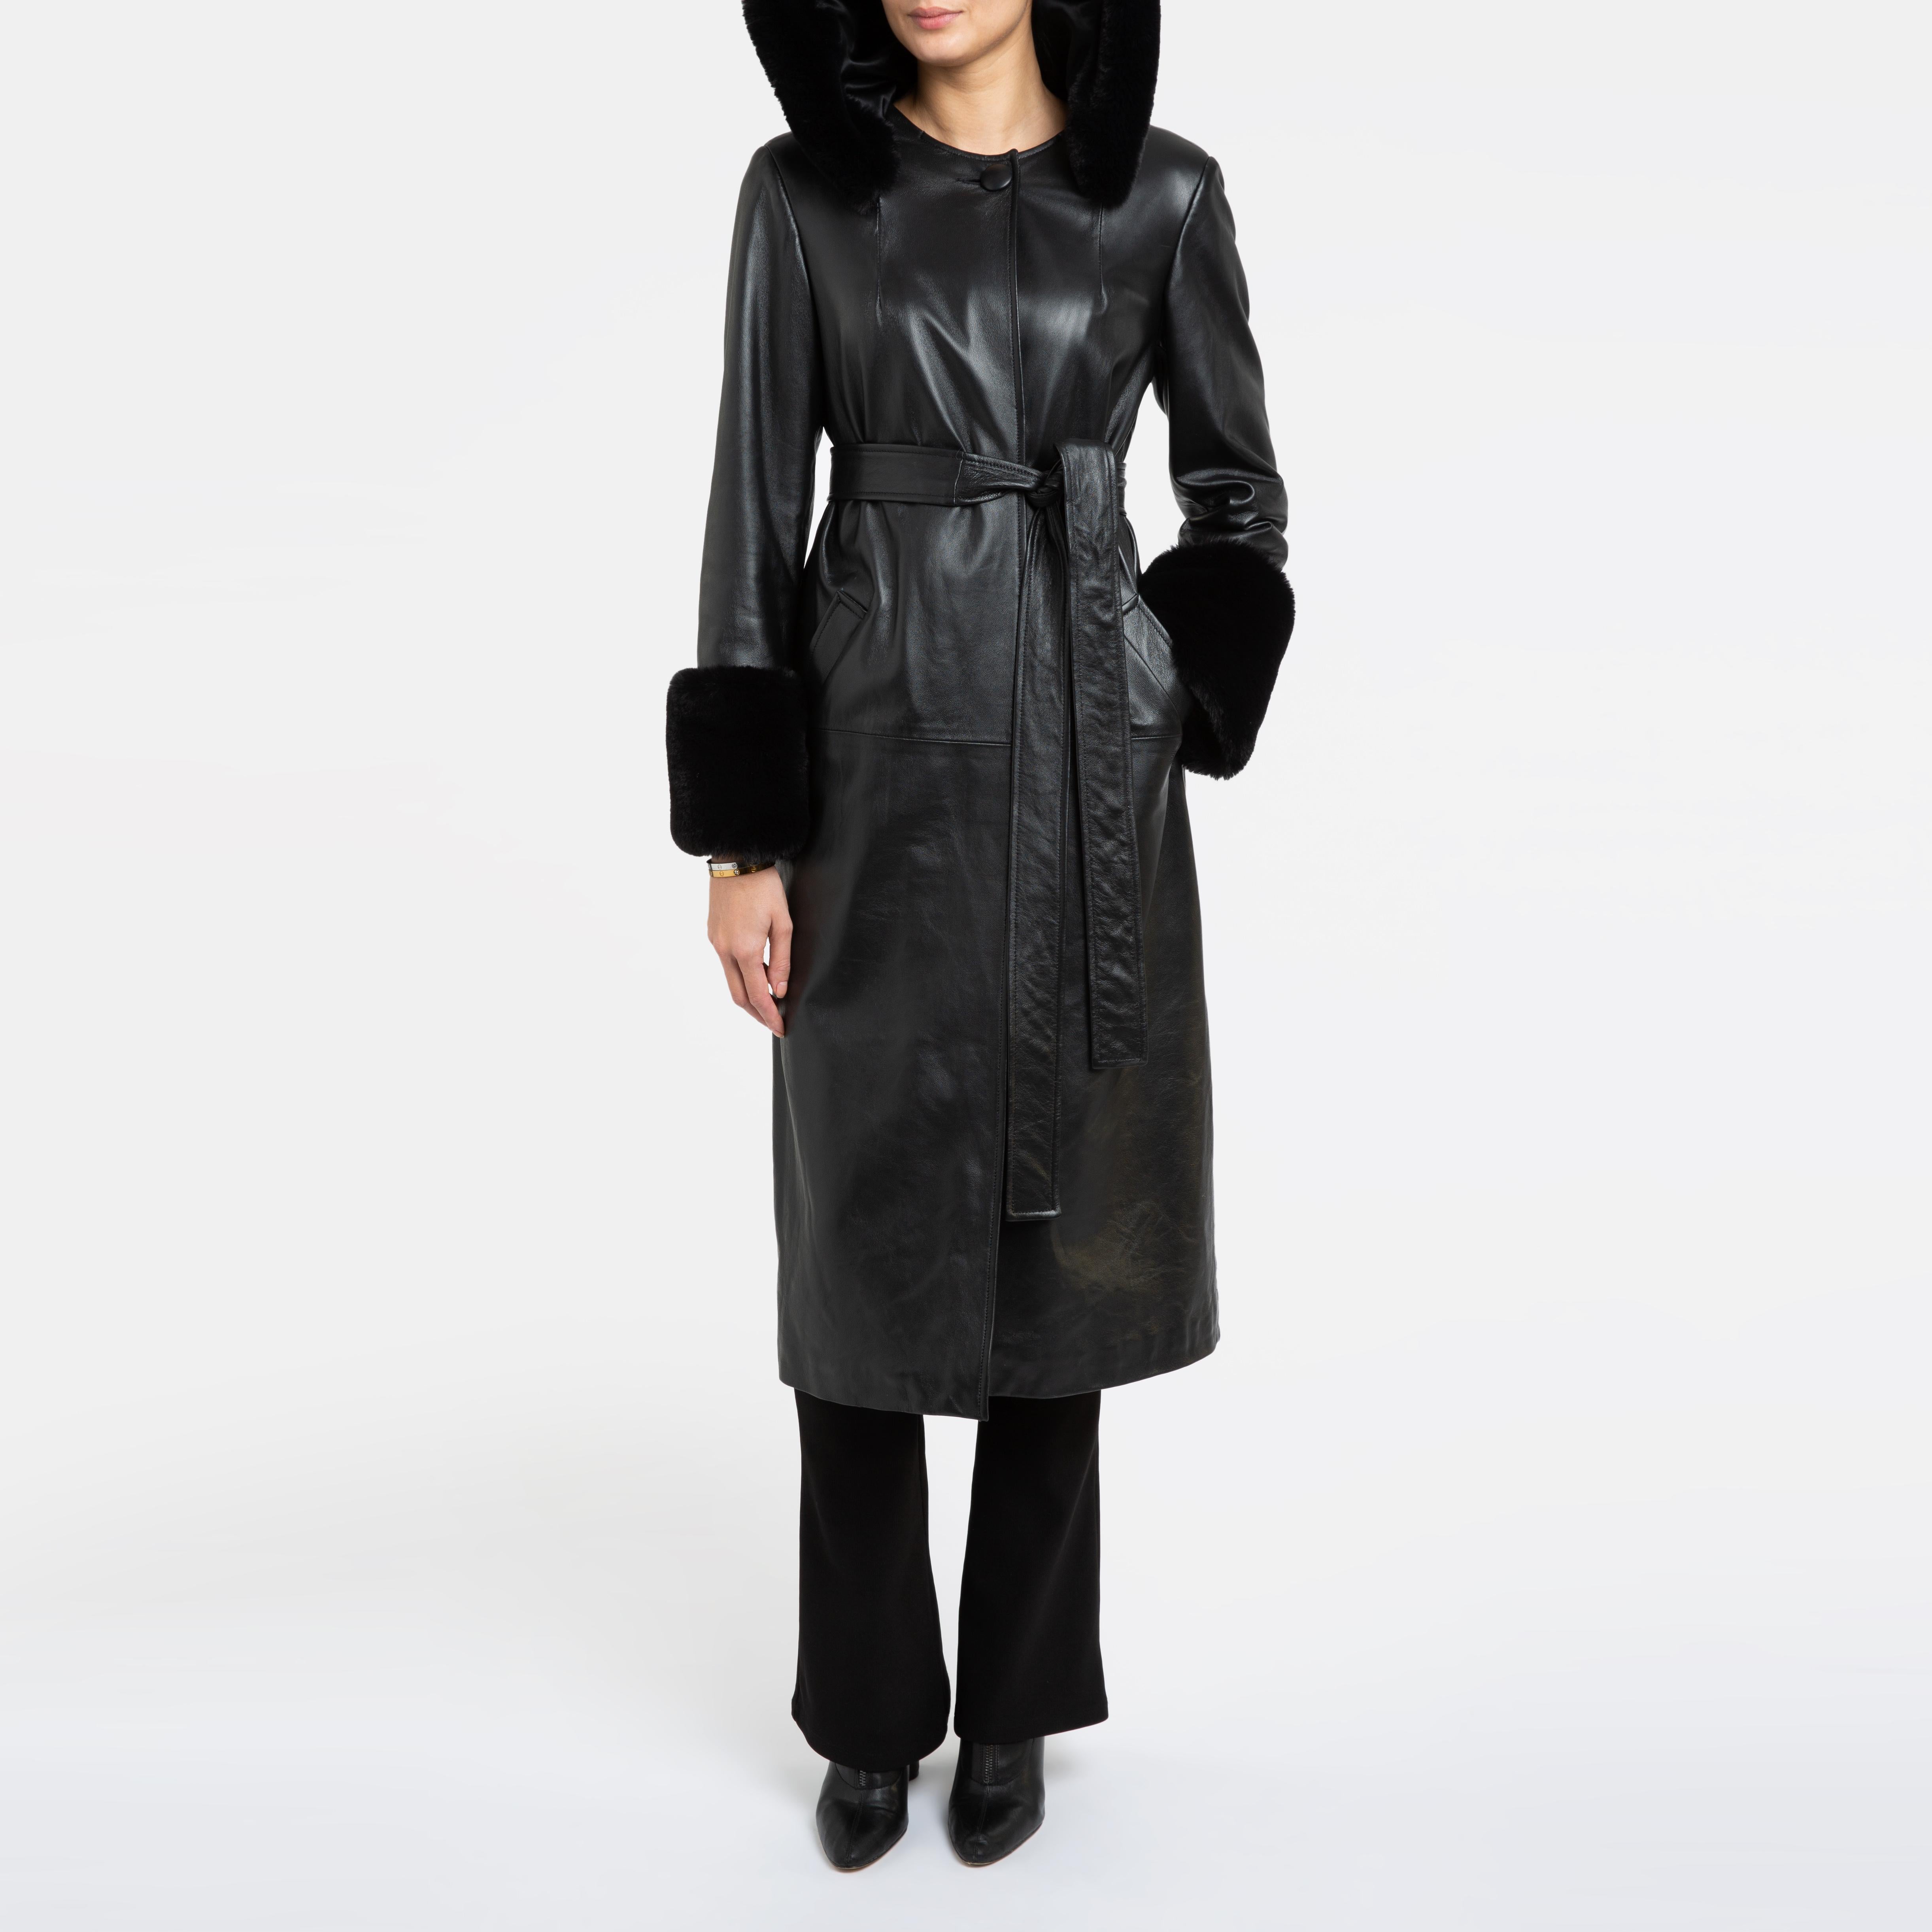 Verheyen London Hooded Leather Trench Coat in Black with Faux Fur - Size uk 12  For Sale 9